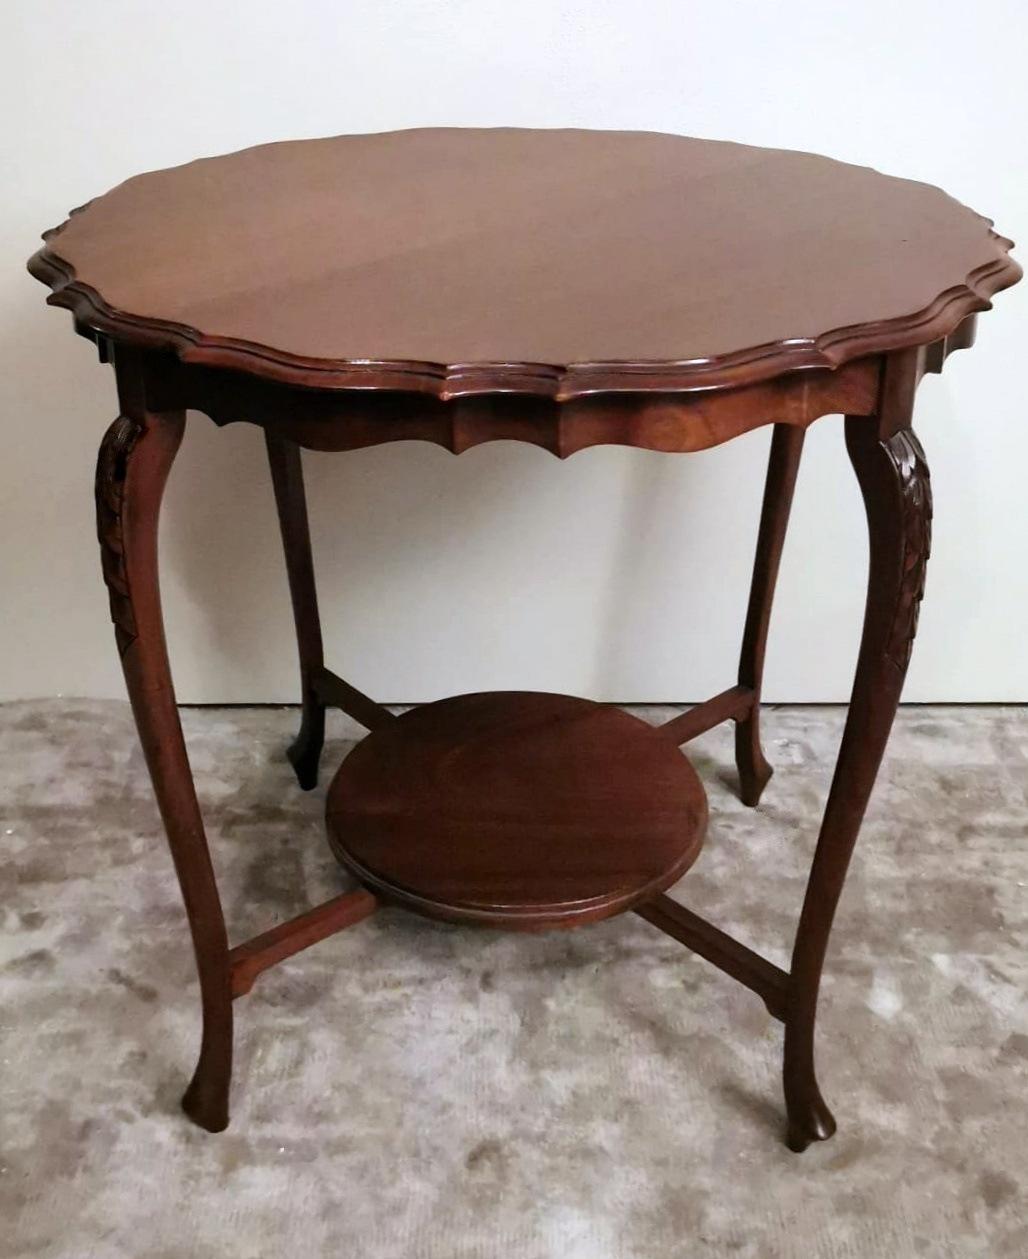 We kindly suggest you read the whole description, because with it we try to give you detailed technical and historical information to guarantee the authenticity of our objects.
Peculiar and elegant coffee table made of Sapele wood of the best